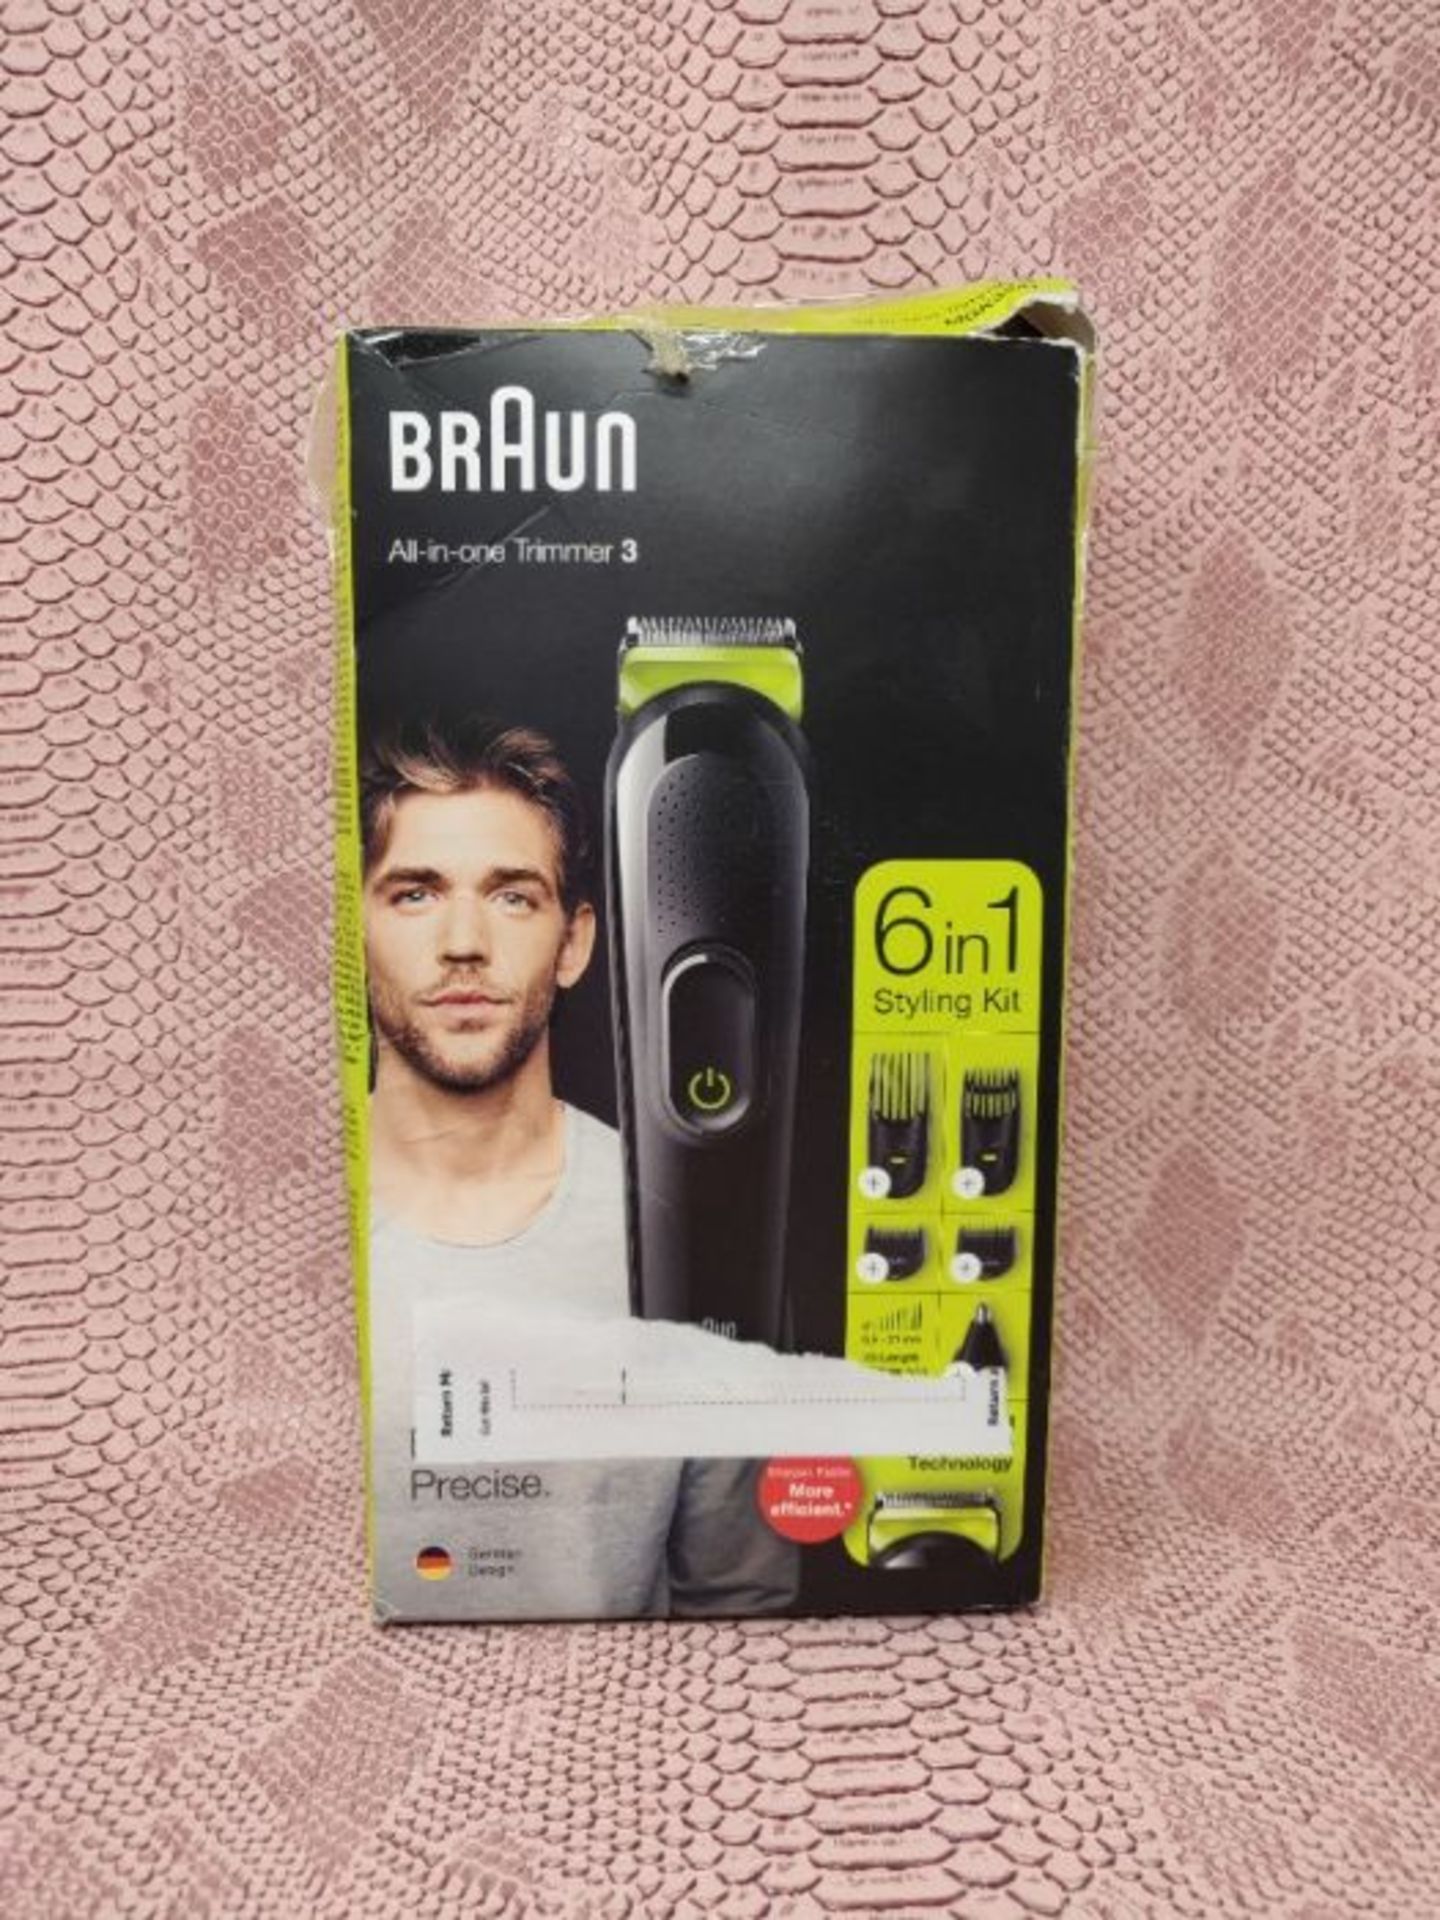 Braun 6-in-1 All-in-one Trimmer 3 MGK3221, Hair Clipper and Beard Trimmer with Lifetim - Image 2 of 3